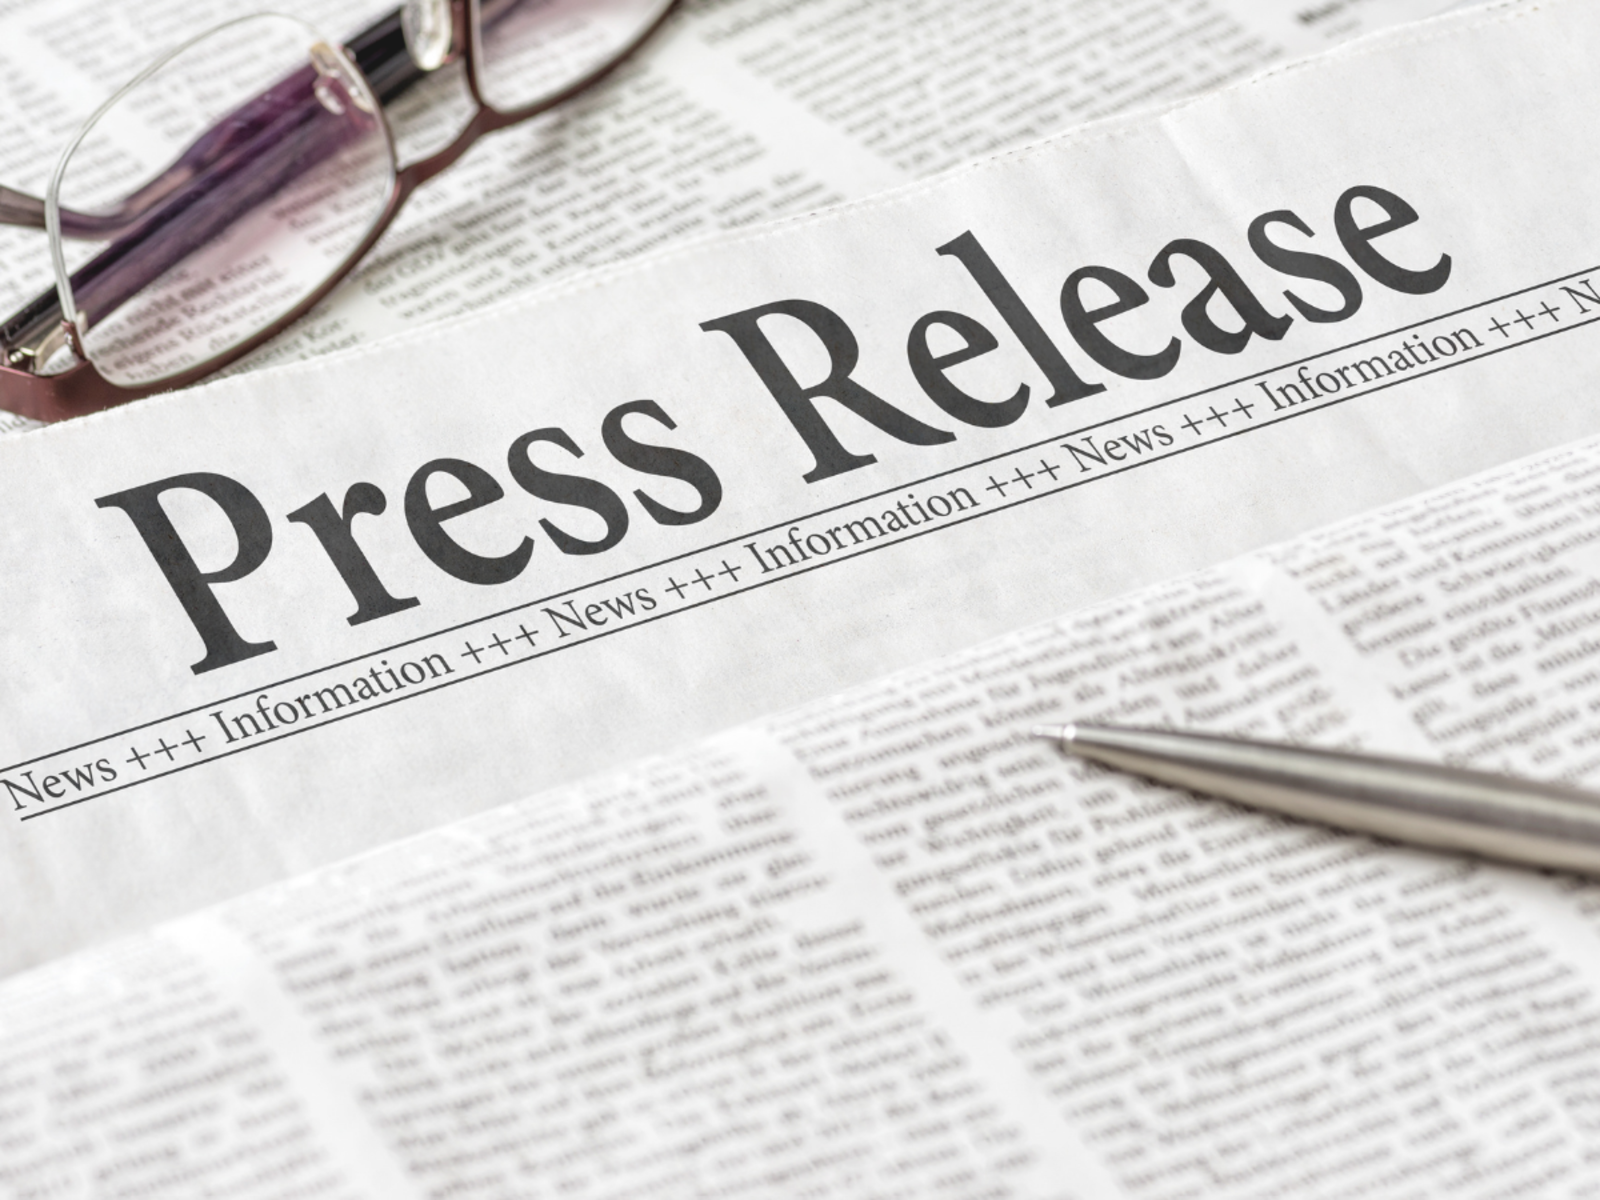 How to write an AP Style Press Release?